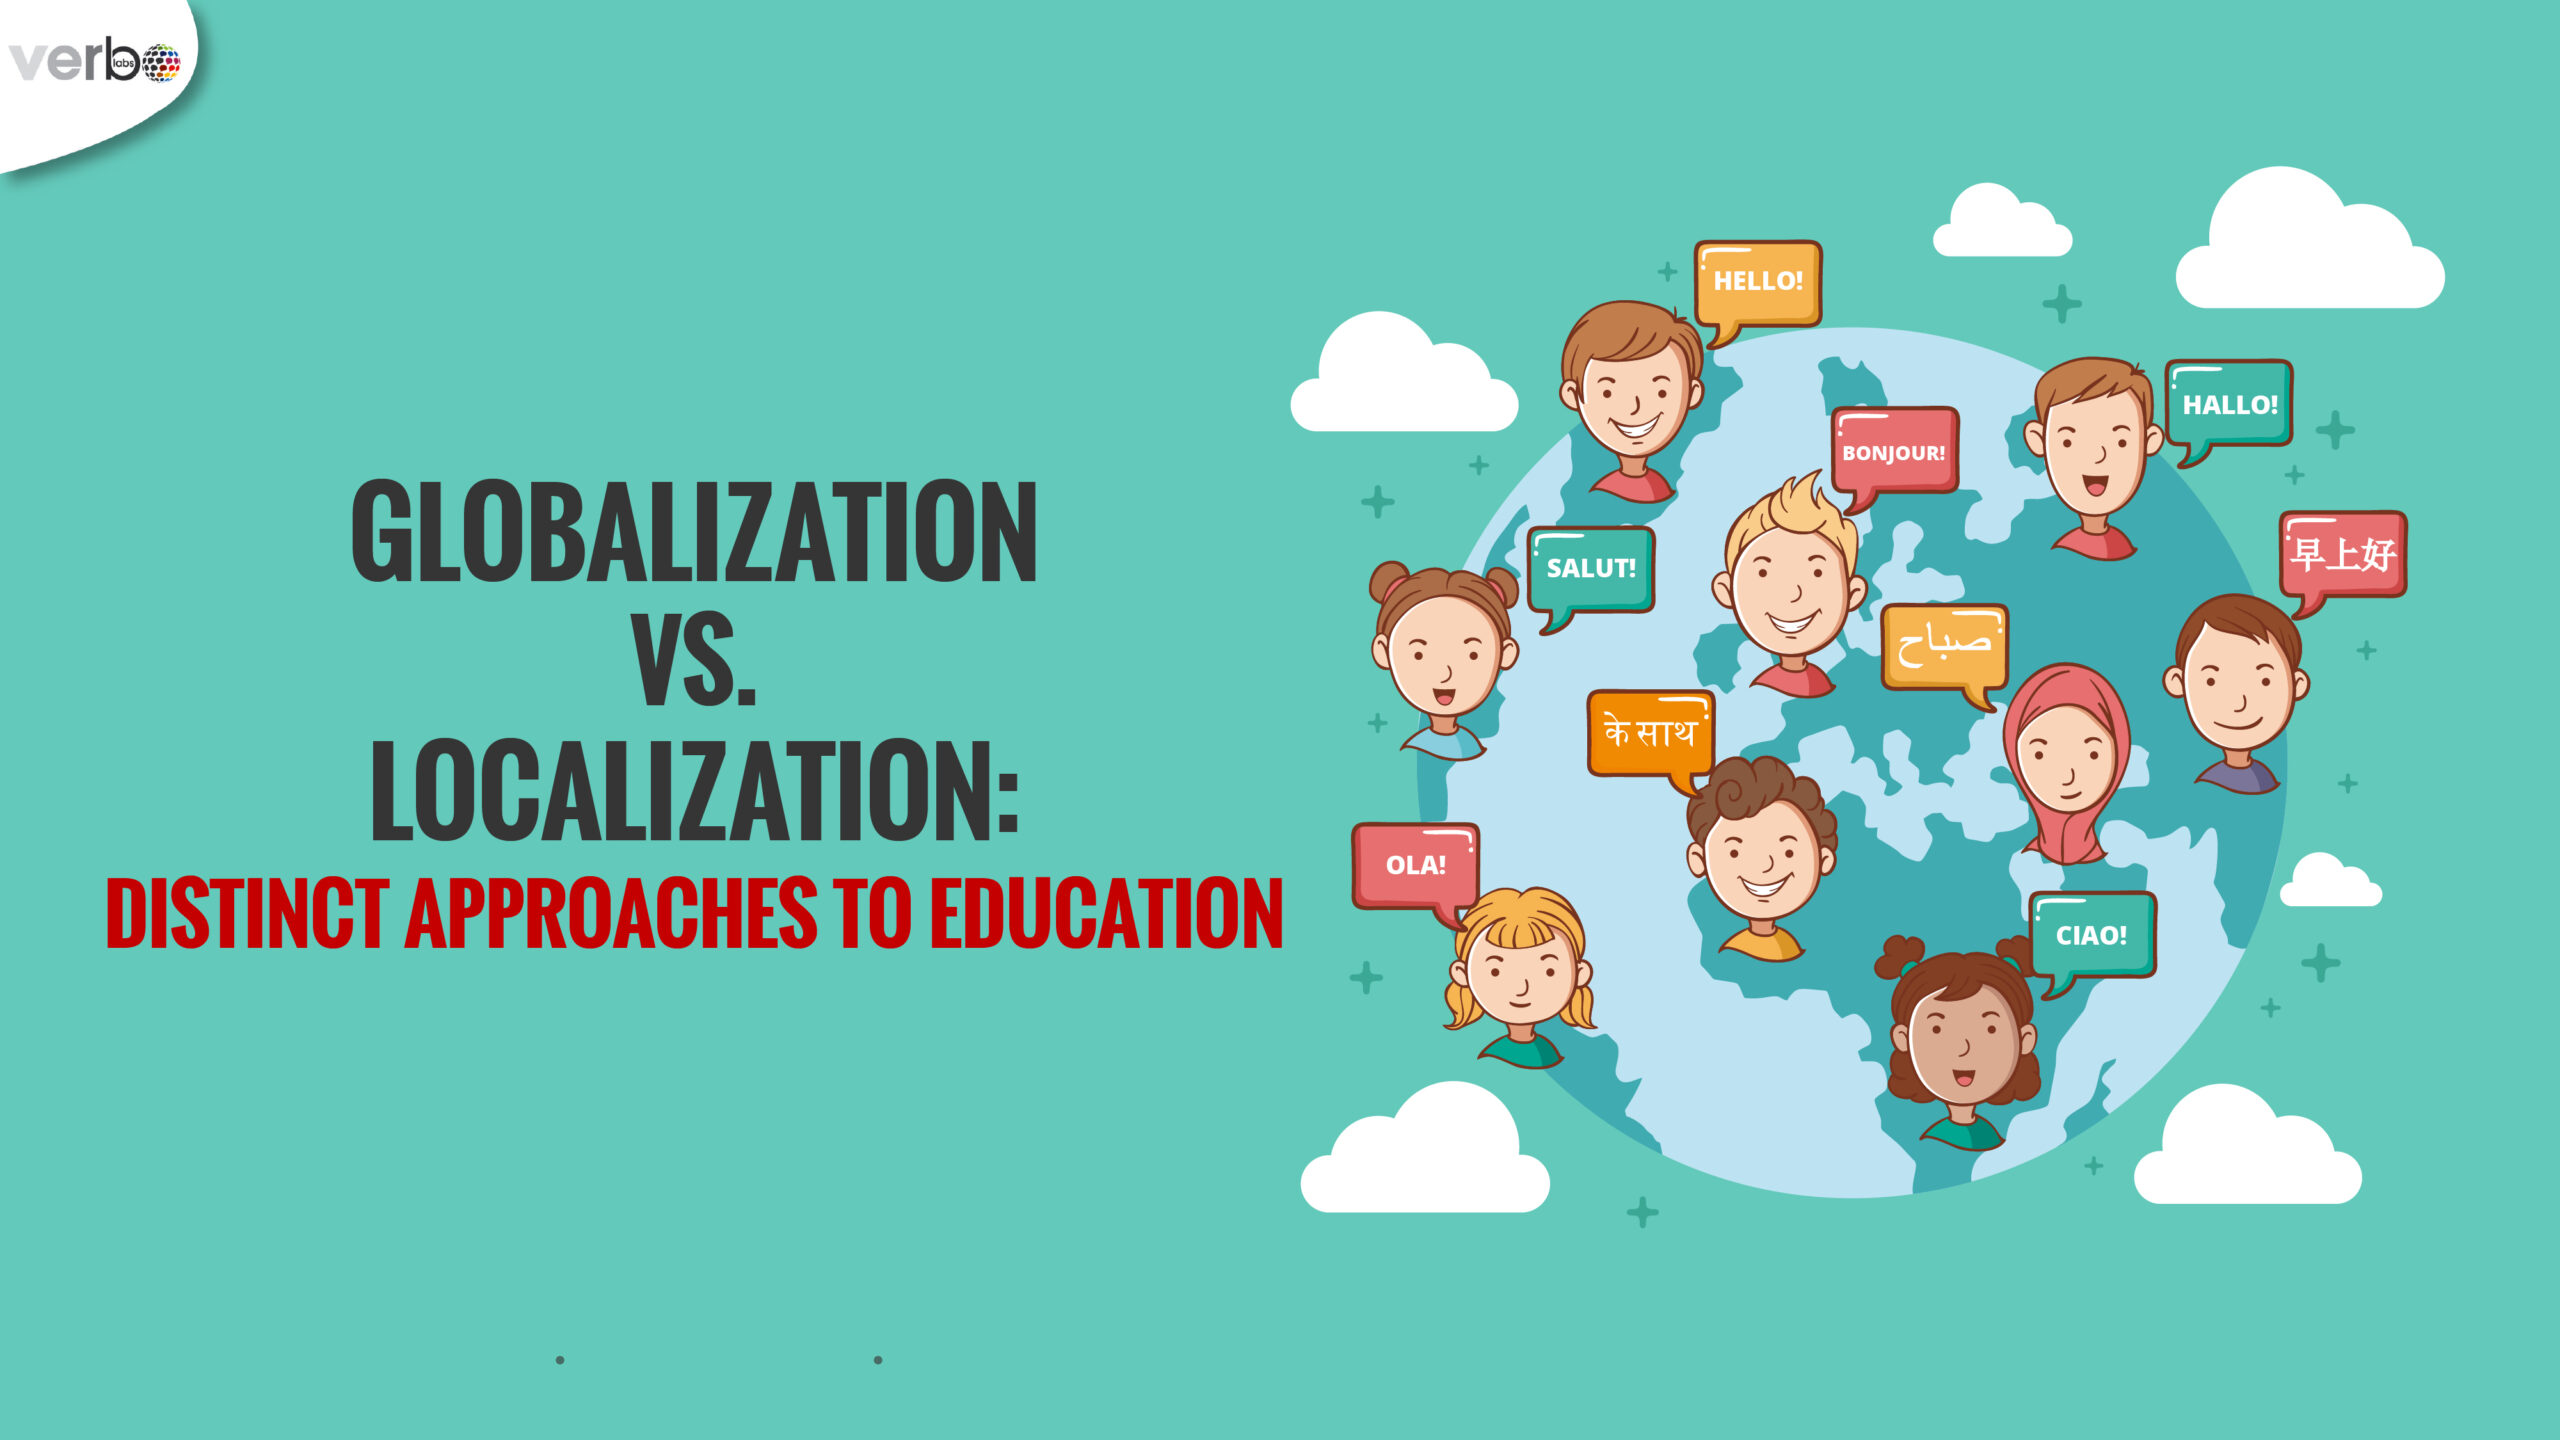 Globalization vs Localization: Distinct approaches to education